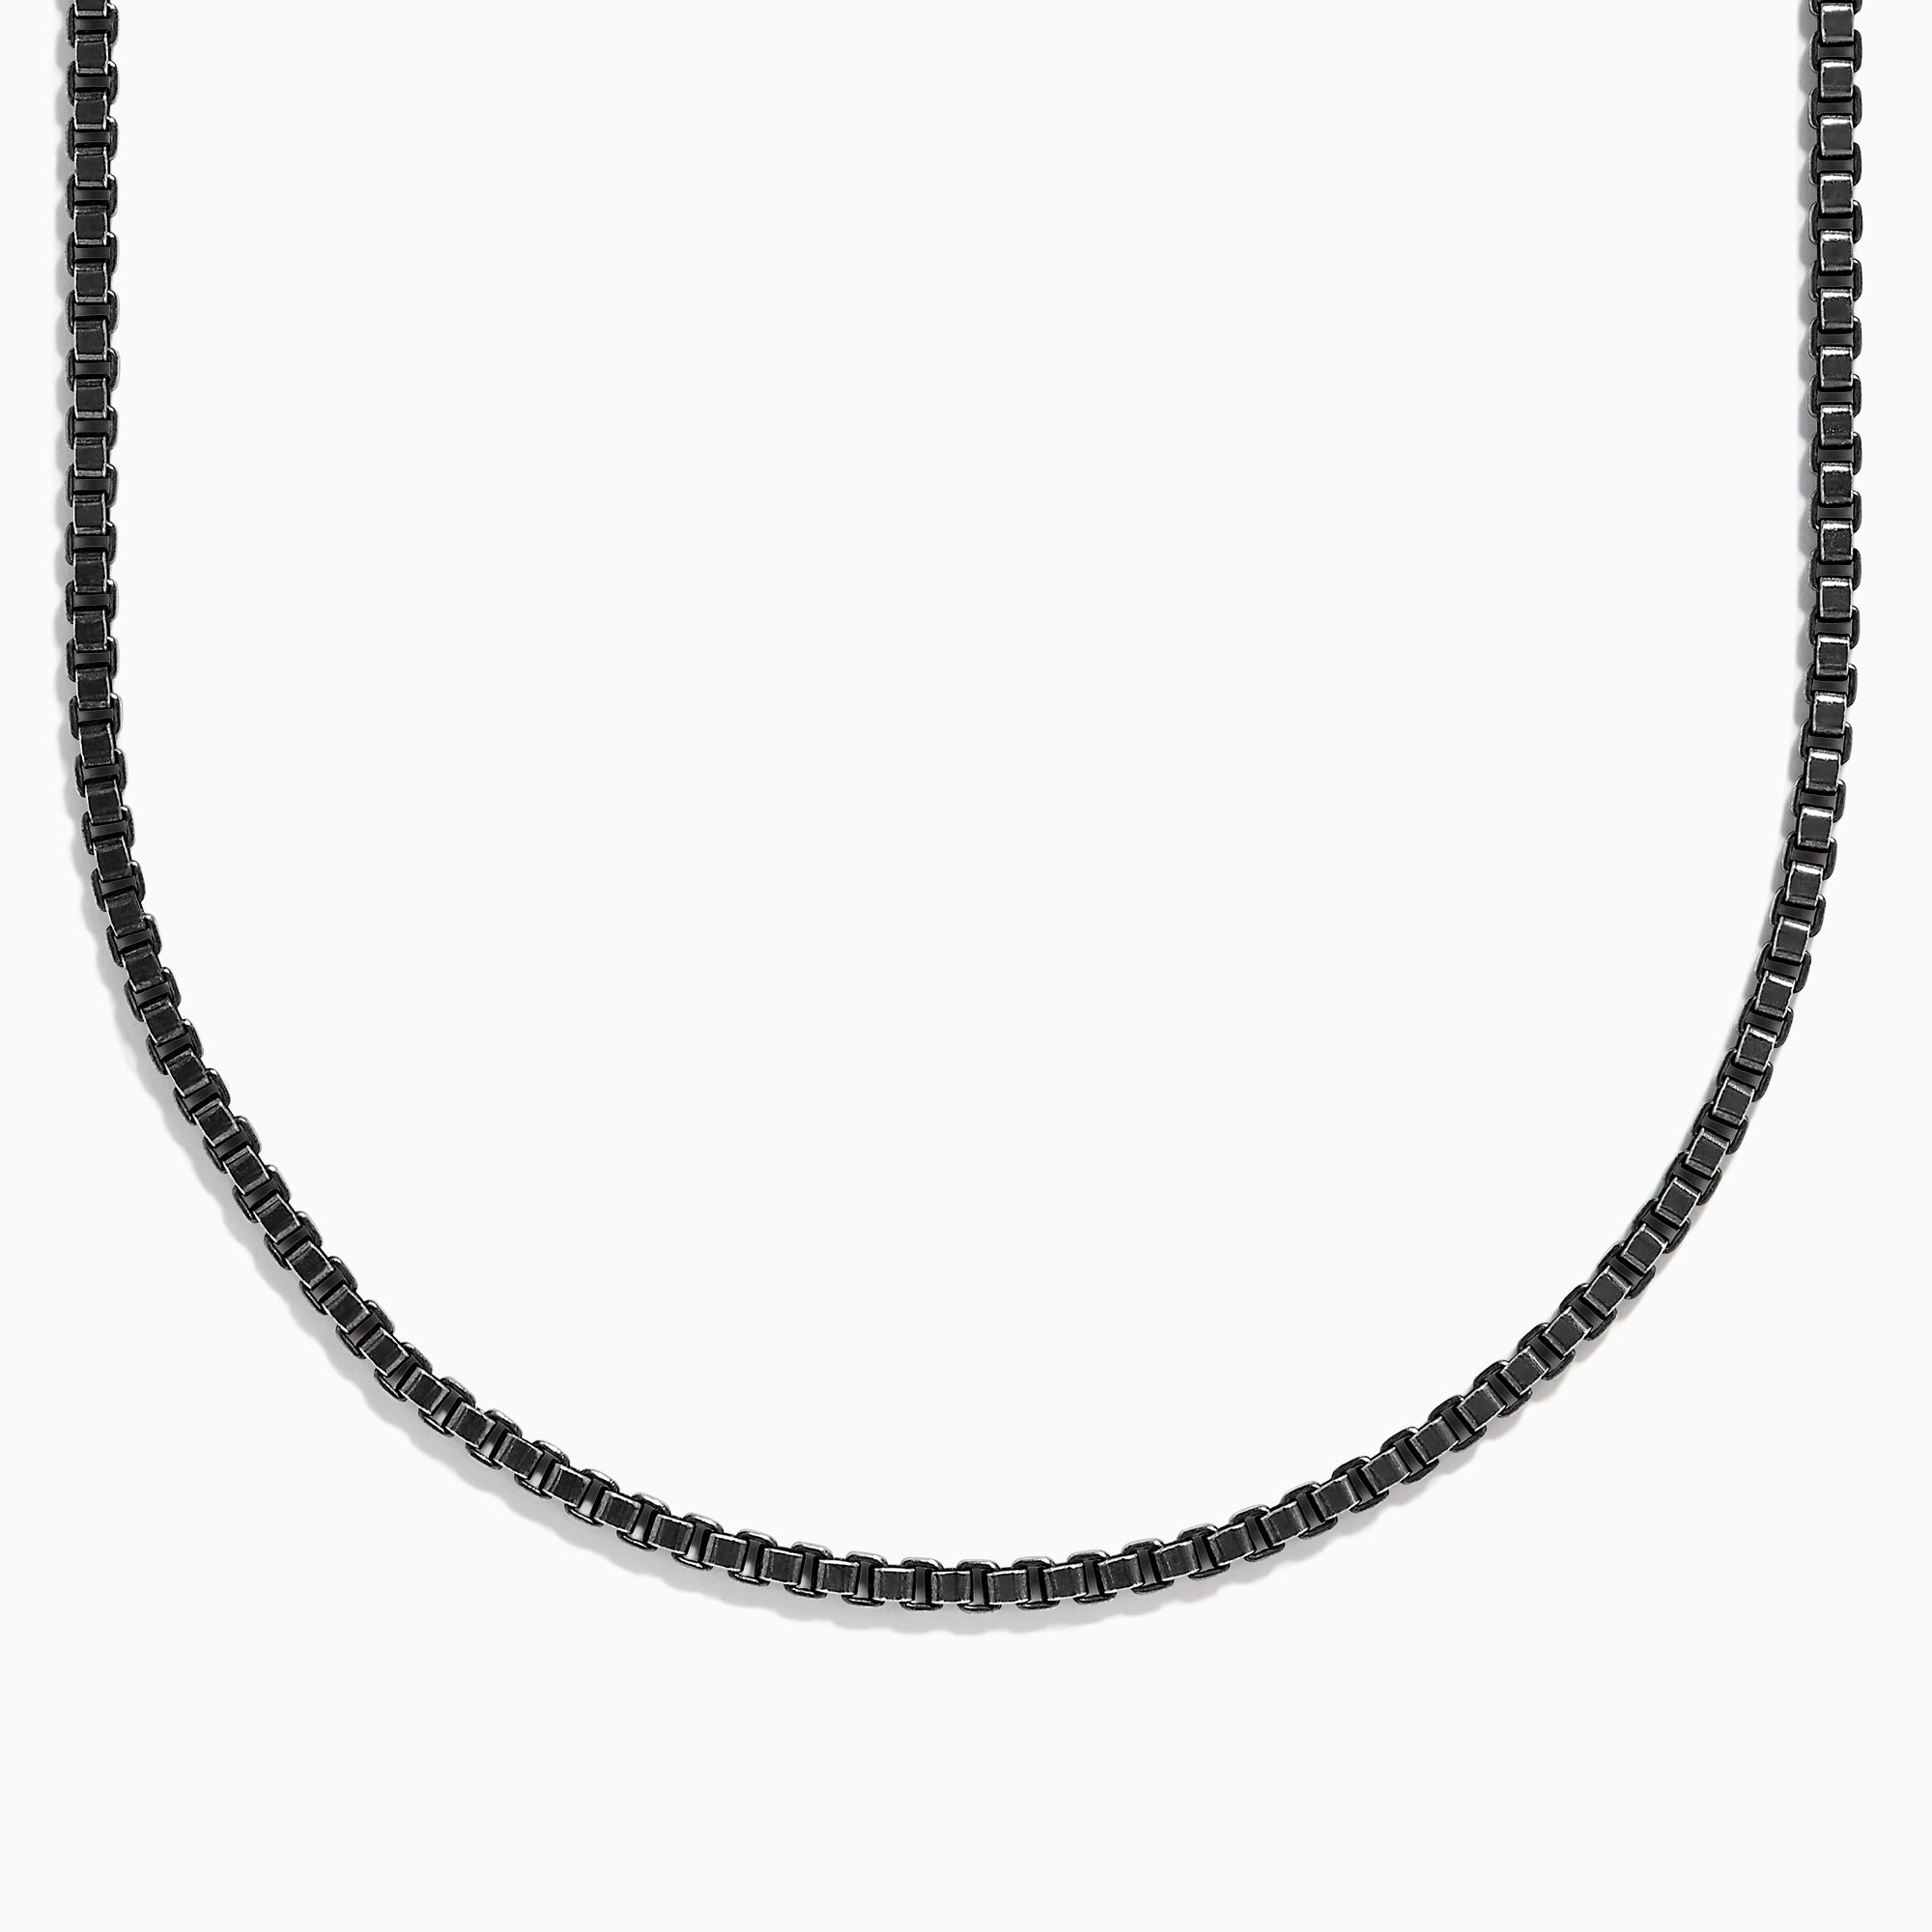 Men's 4mm Solid Sterling Silver .925 Curb Link Chain Necklace, Made in  Italy (16) | Amazon.com